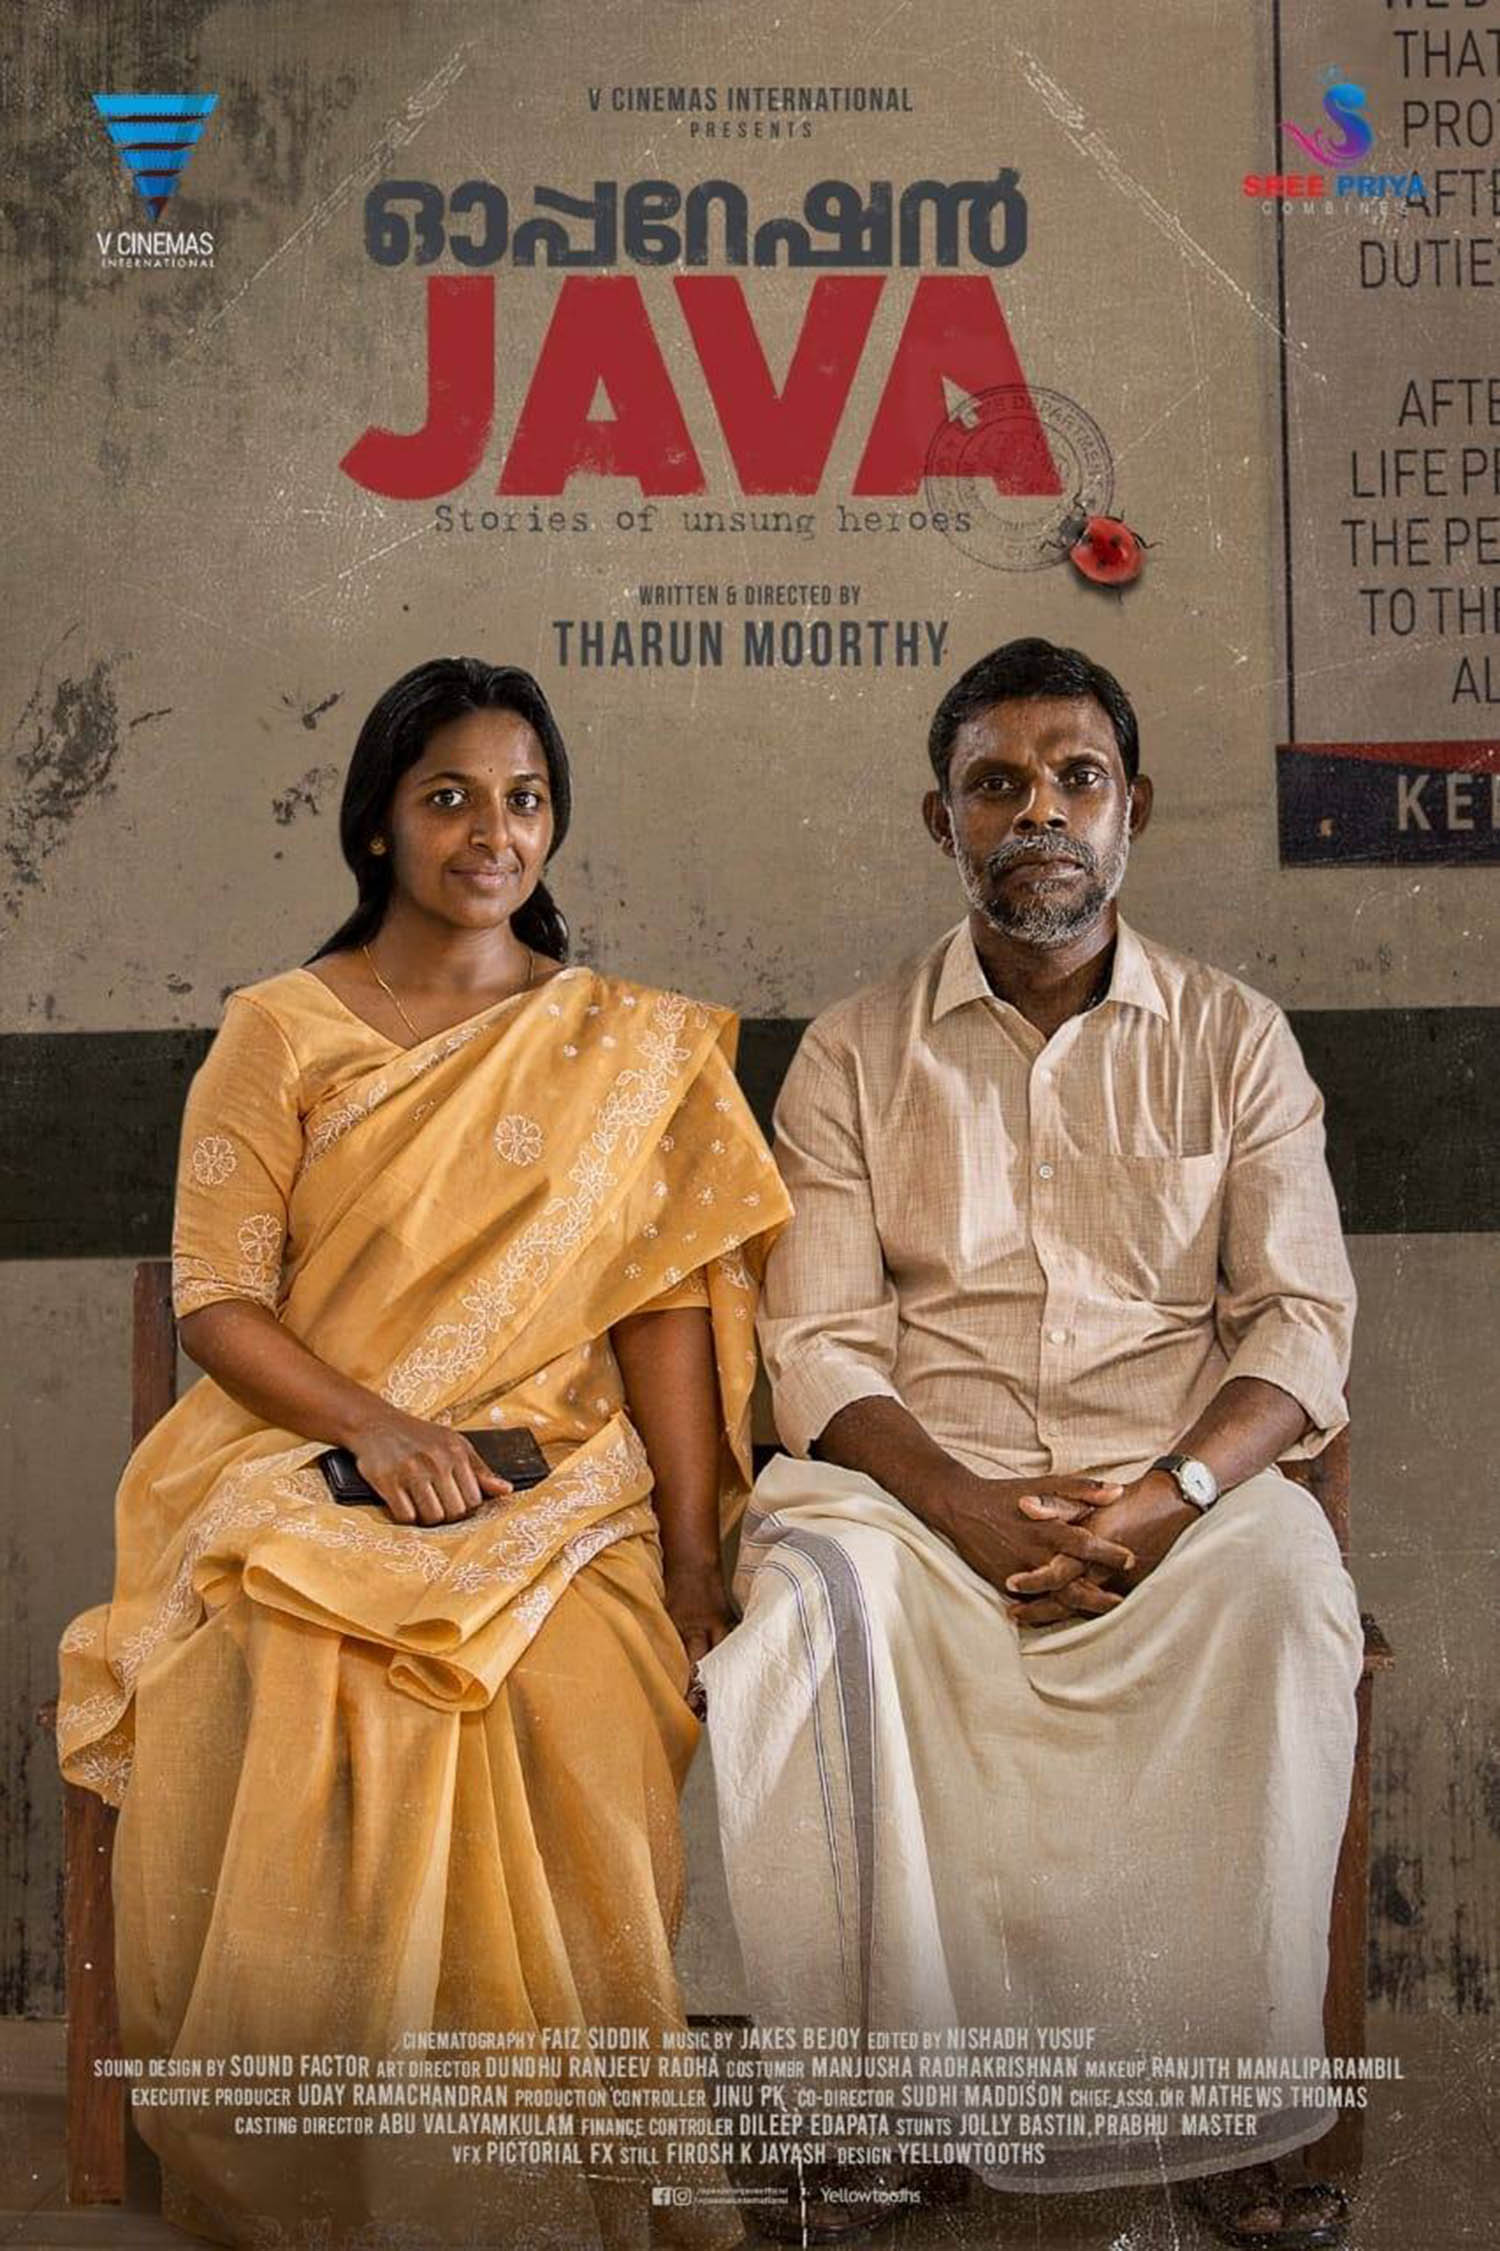 Operation Java review,Operation Java ratings,Operation Java latest reports,Operation Java kerala box office reports,Operation Java latest news,new malayalam cinema Operation Java,Operation Java reviews,Operation Java poster,Operation Java malayalam movie review,Operation Java movie stills